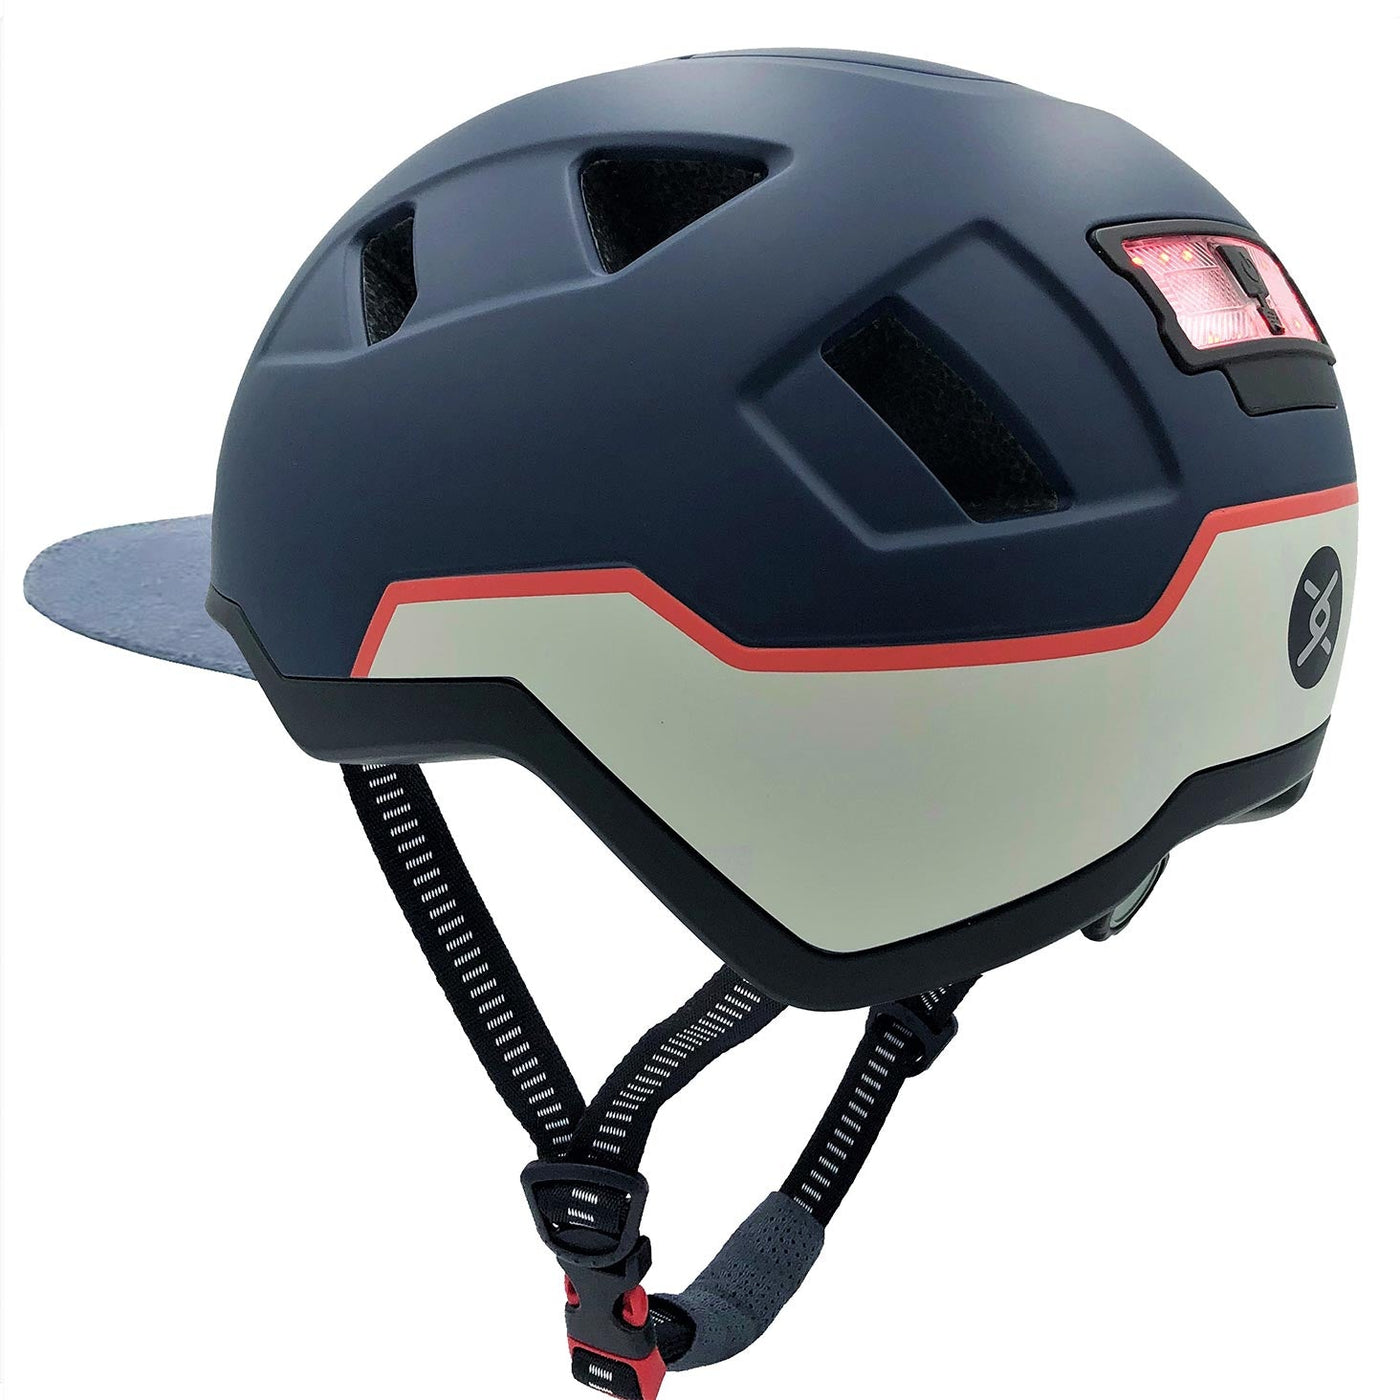 xnito ebike helmet with lights and visor, side view of logan colorway